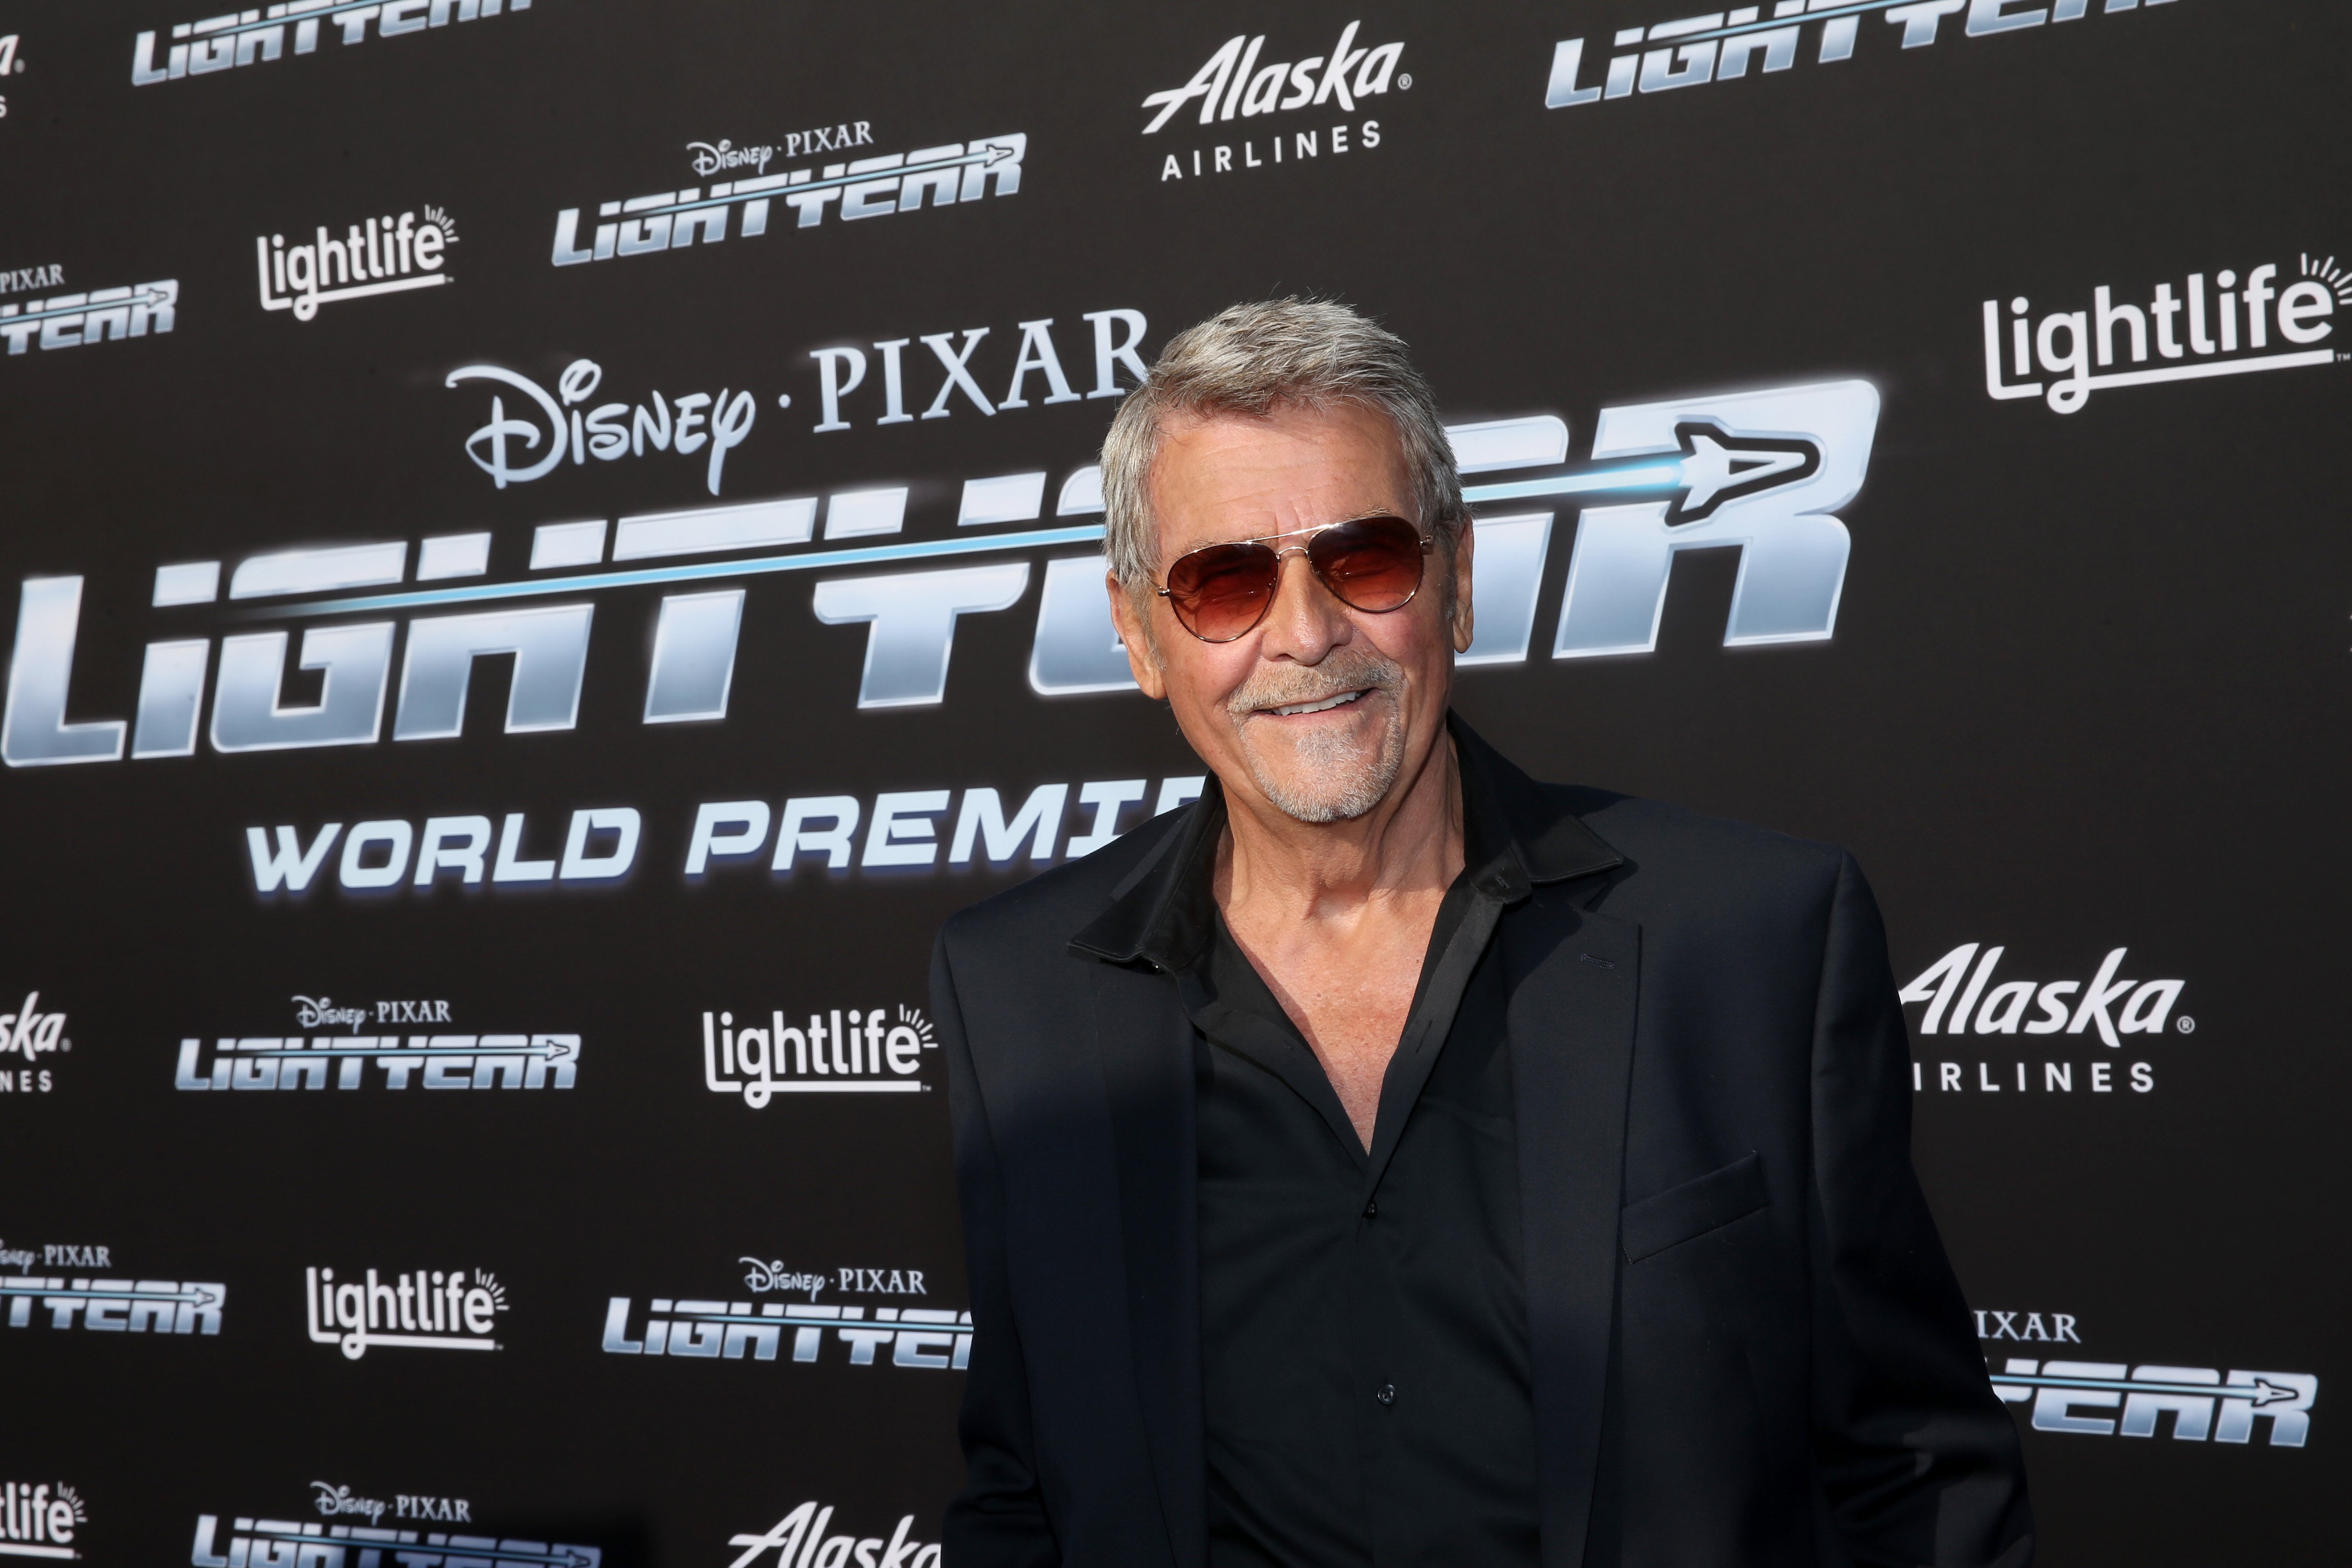 James Brolin attends the World Premiere of Disney and Pixar's feature film "Lightyear" at El Capitan Theatre in Hollywood, California on June 08, 2022 | Source: Getty Images